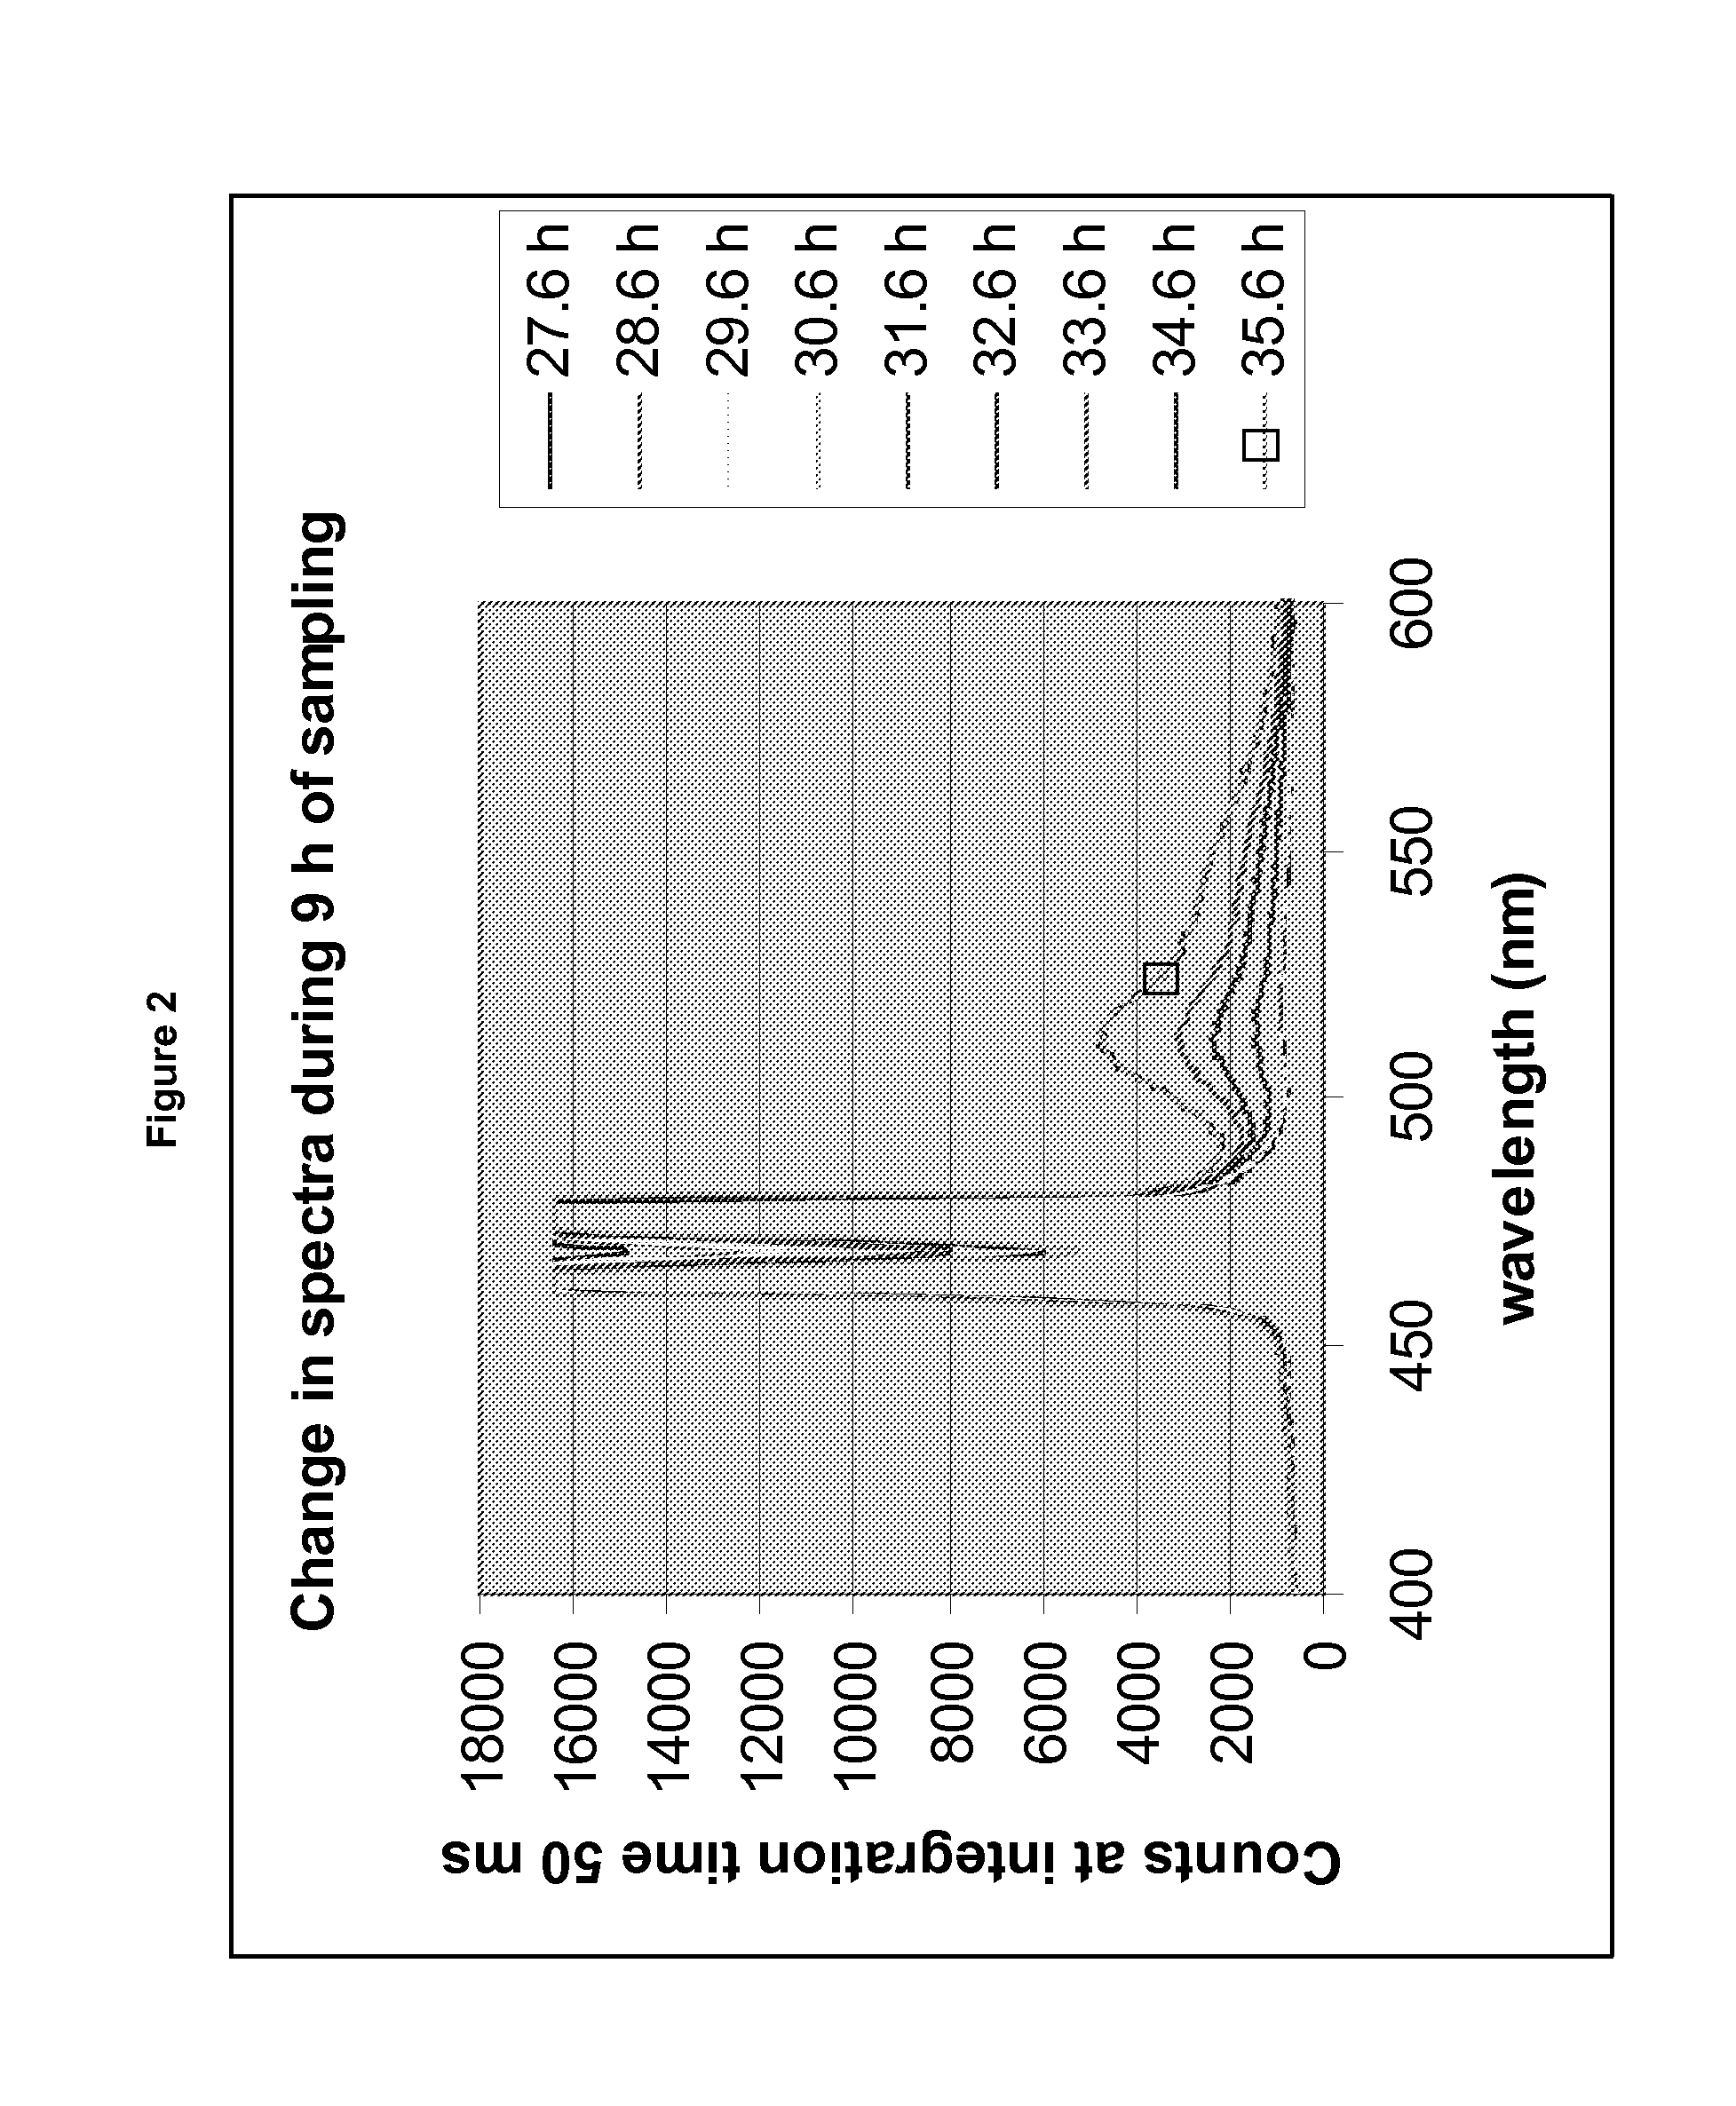 DNase Expression in Recombinant Host Cells